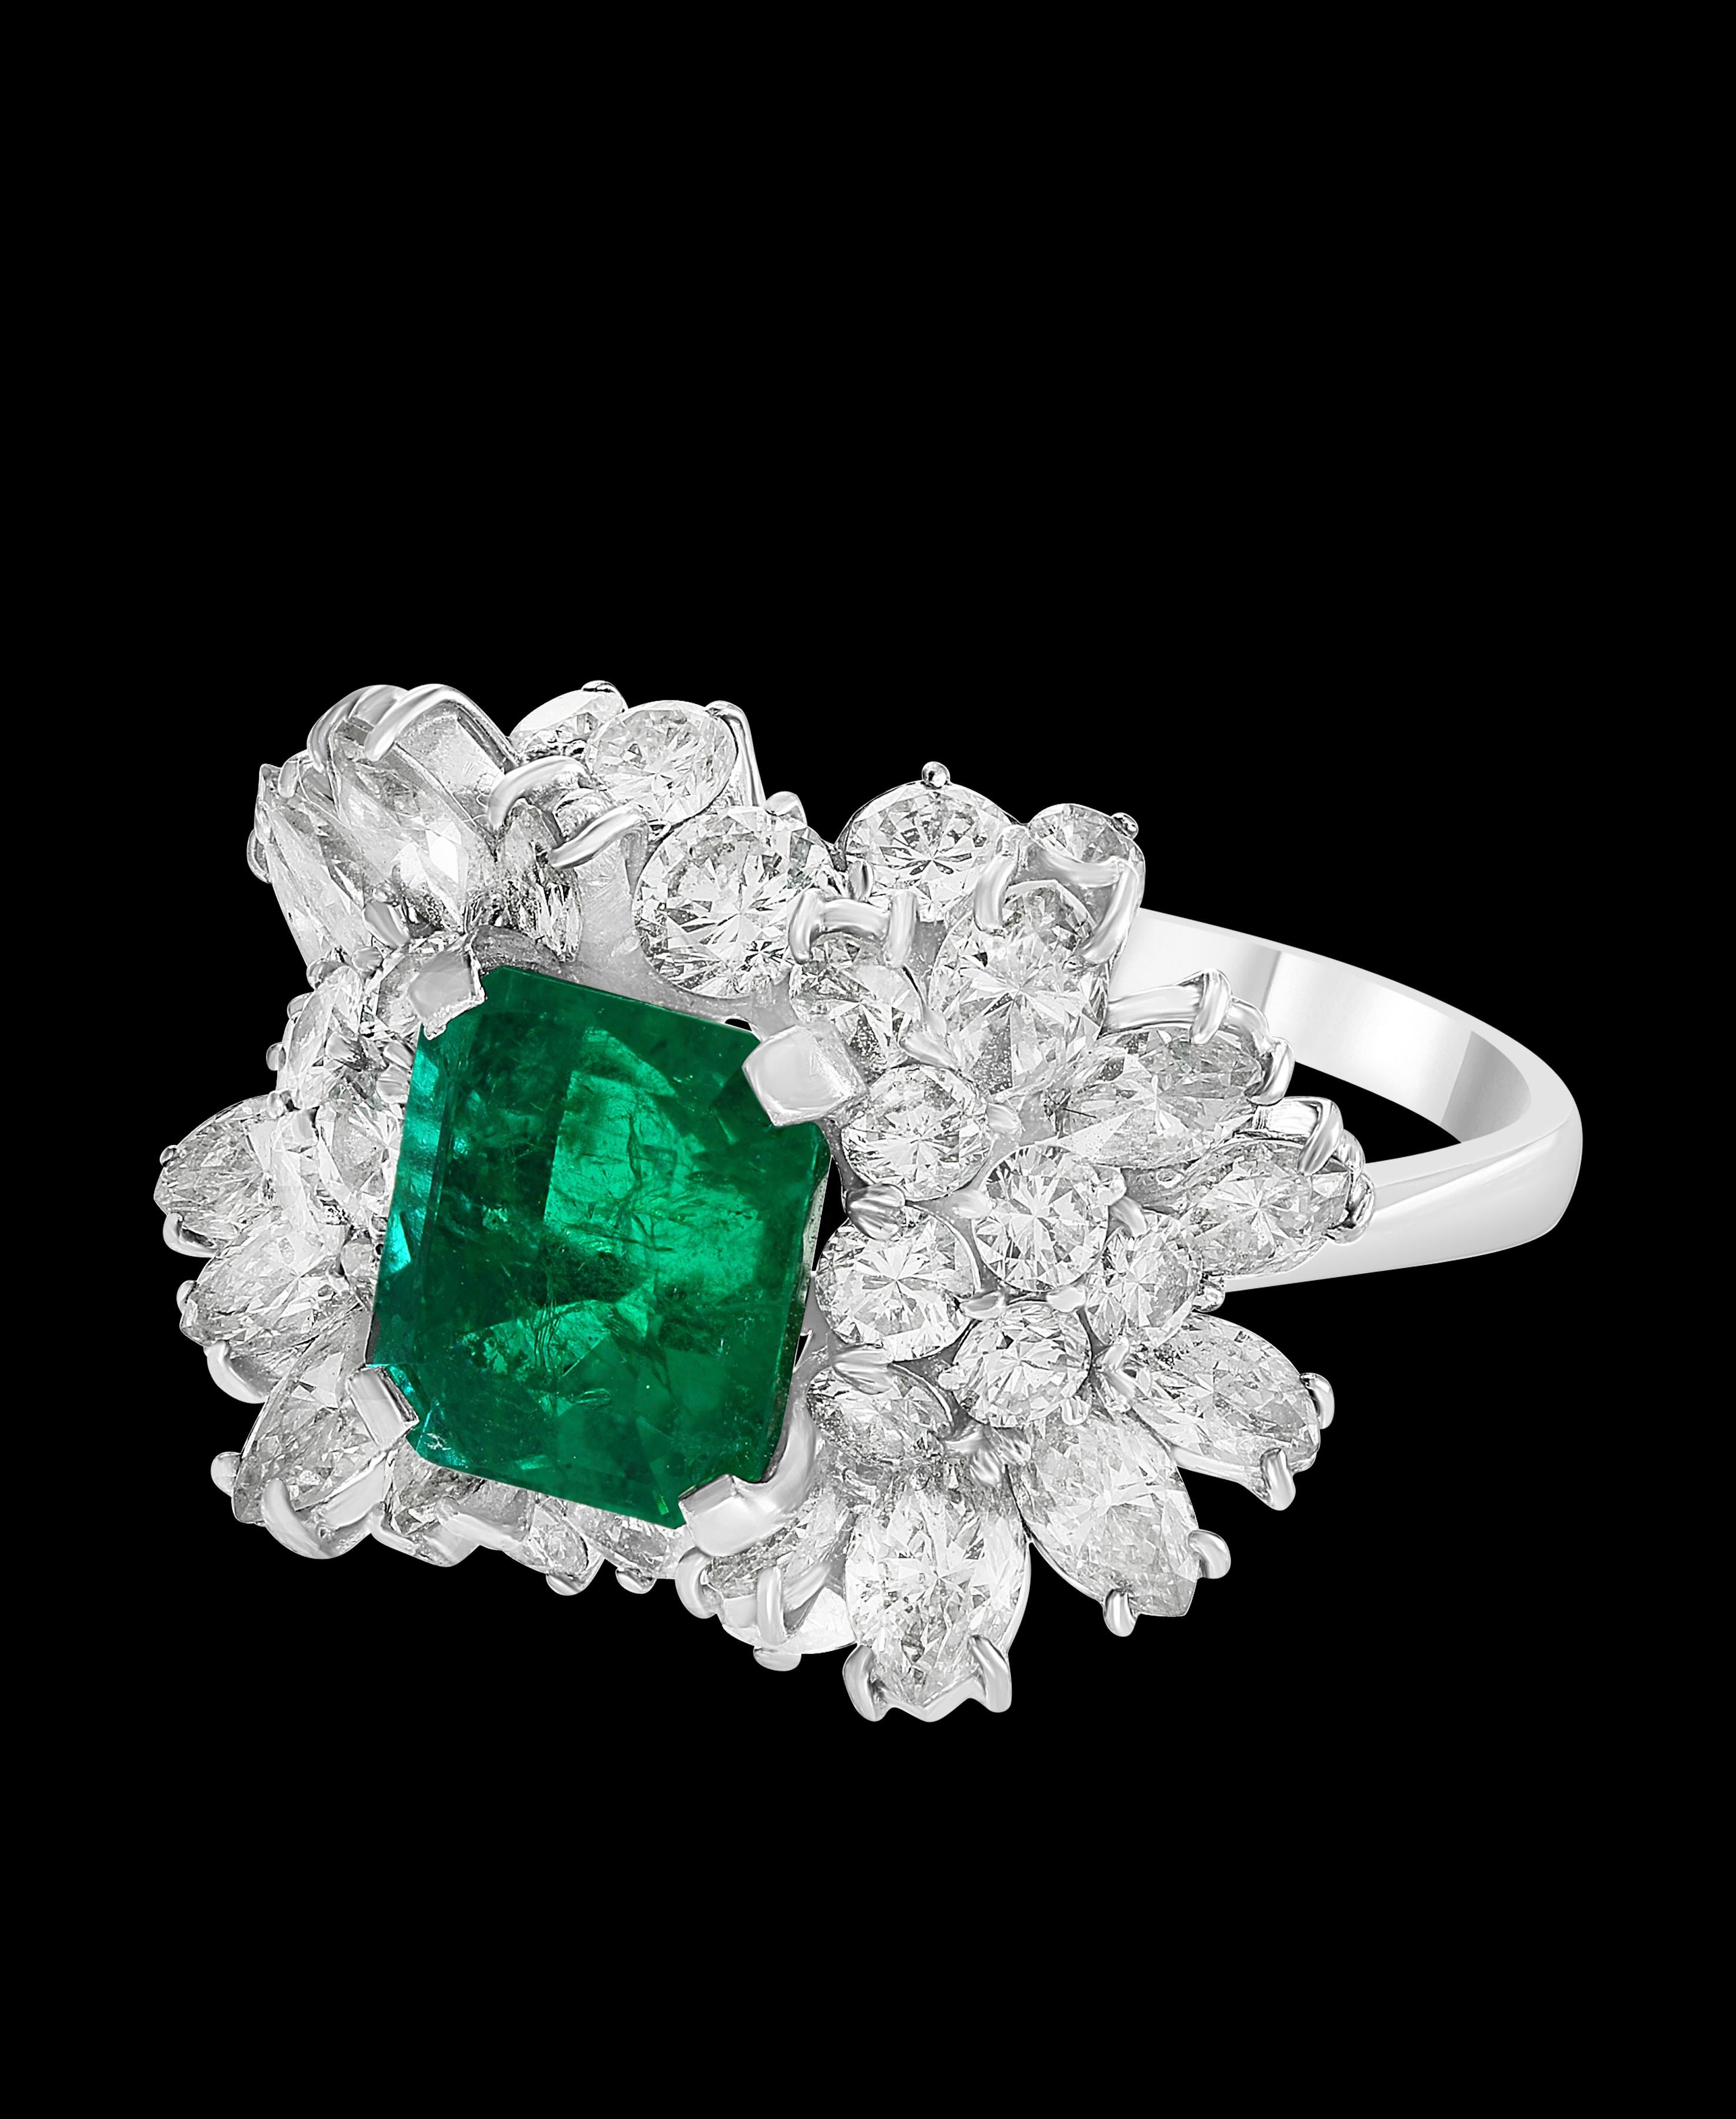 2.5 Carat Emerald Cut Colombian Emerald and Diamond 18 Karat Gold Ring  Estate For Sale at 1stDibs | 2.5 carat emerald cut diamond ring, 2.5 carat  emerald ring, 2.5 carat emerald cut diamond